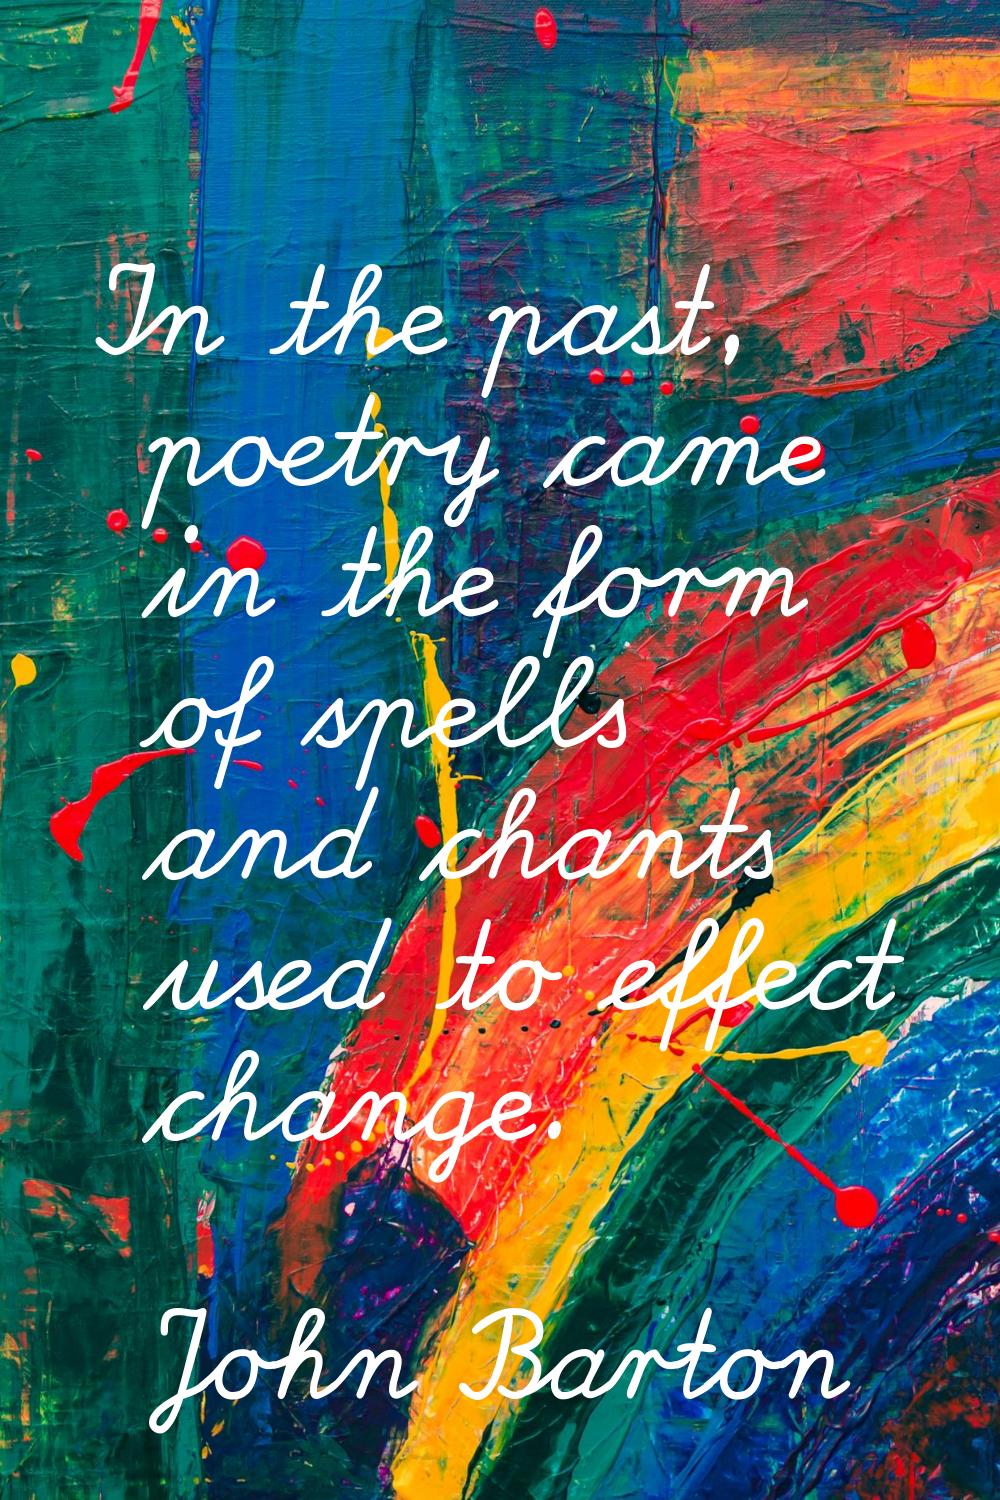 In the past, poetry came in the form of spells and chants used to effect change.